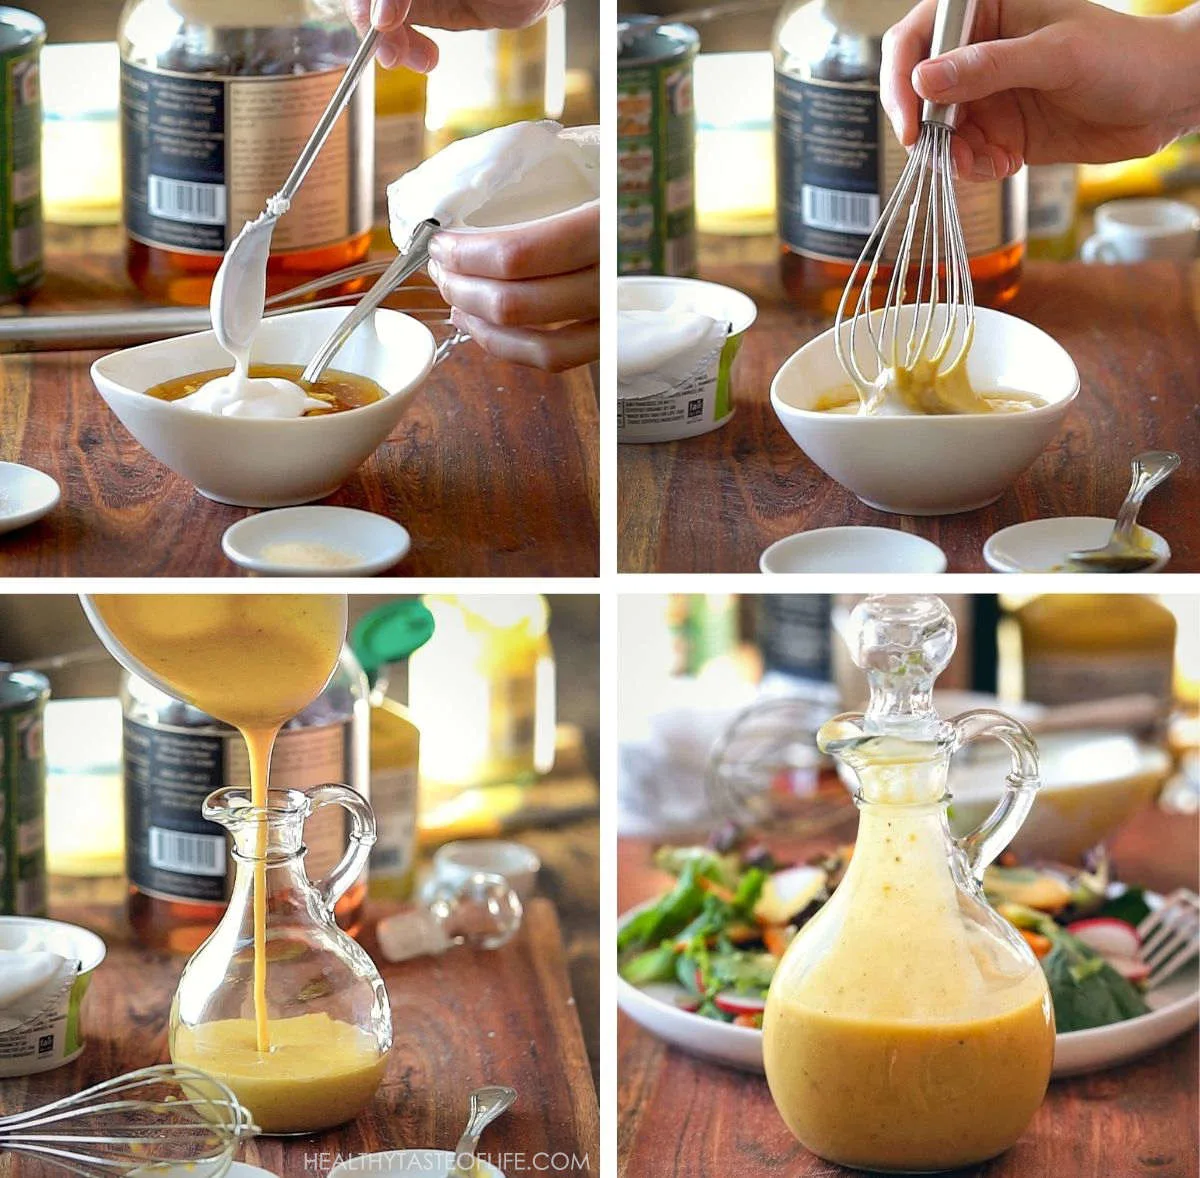 Process shots showing steps on how to make a dairy free honey mustard sauce without mayo and honey.